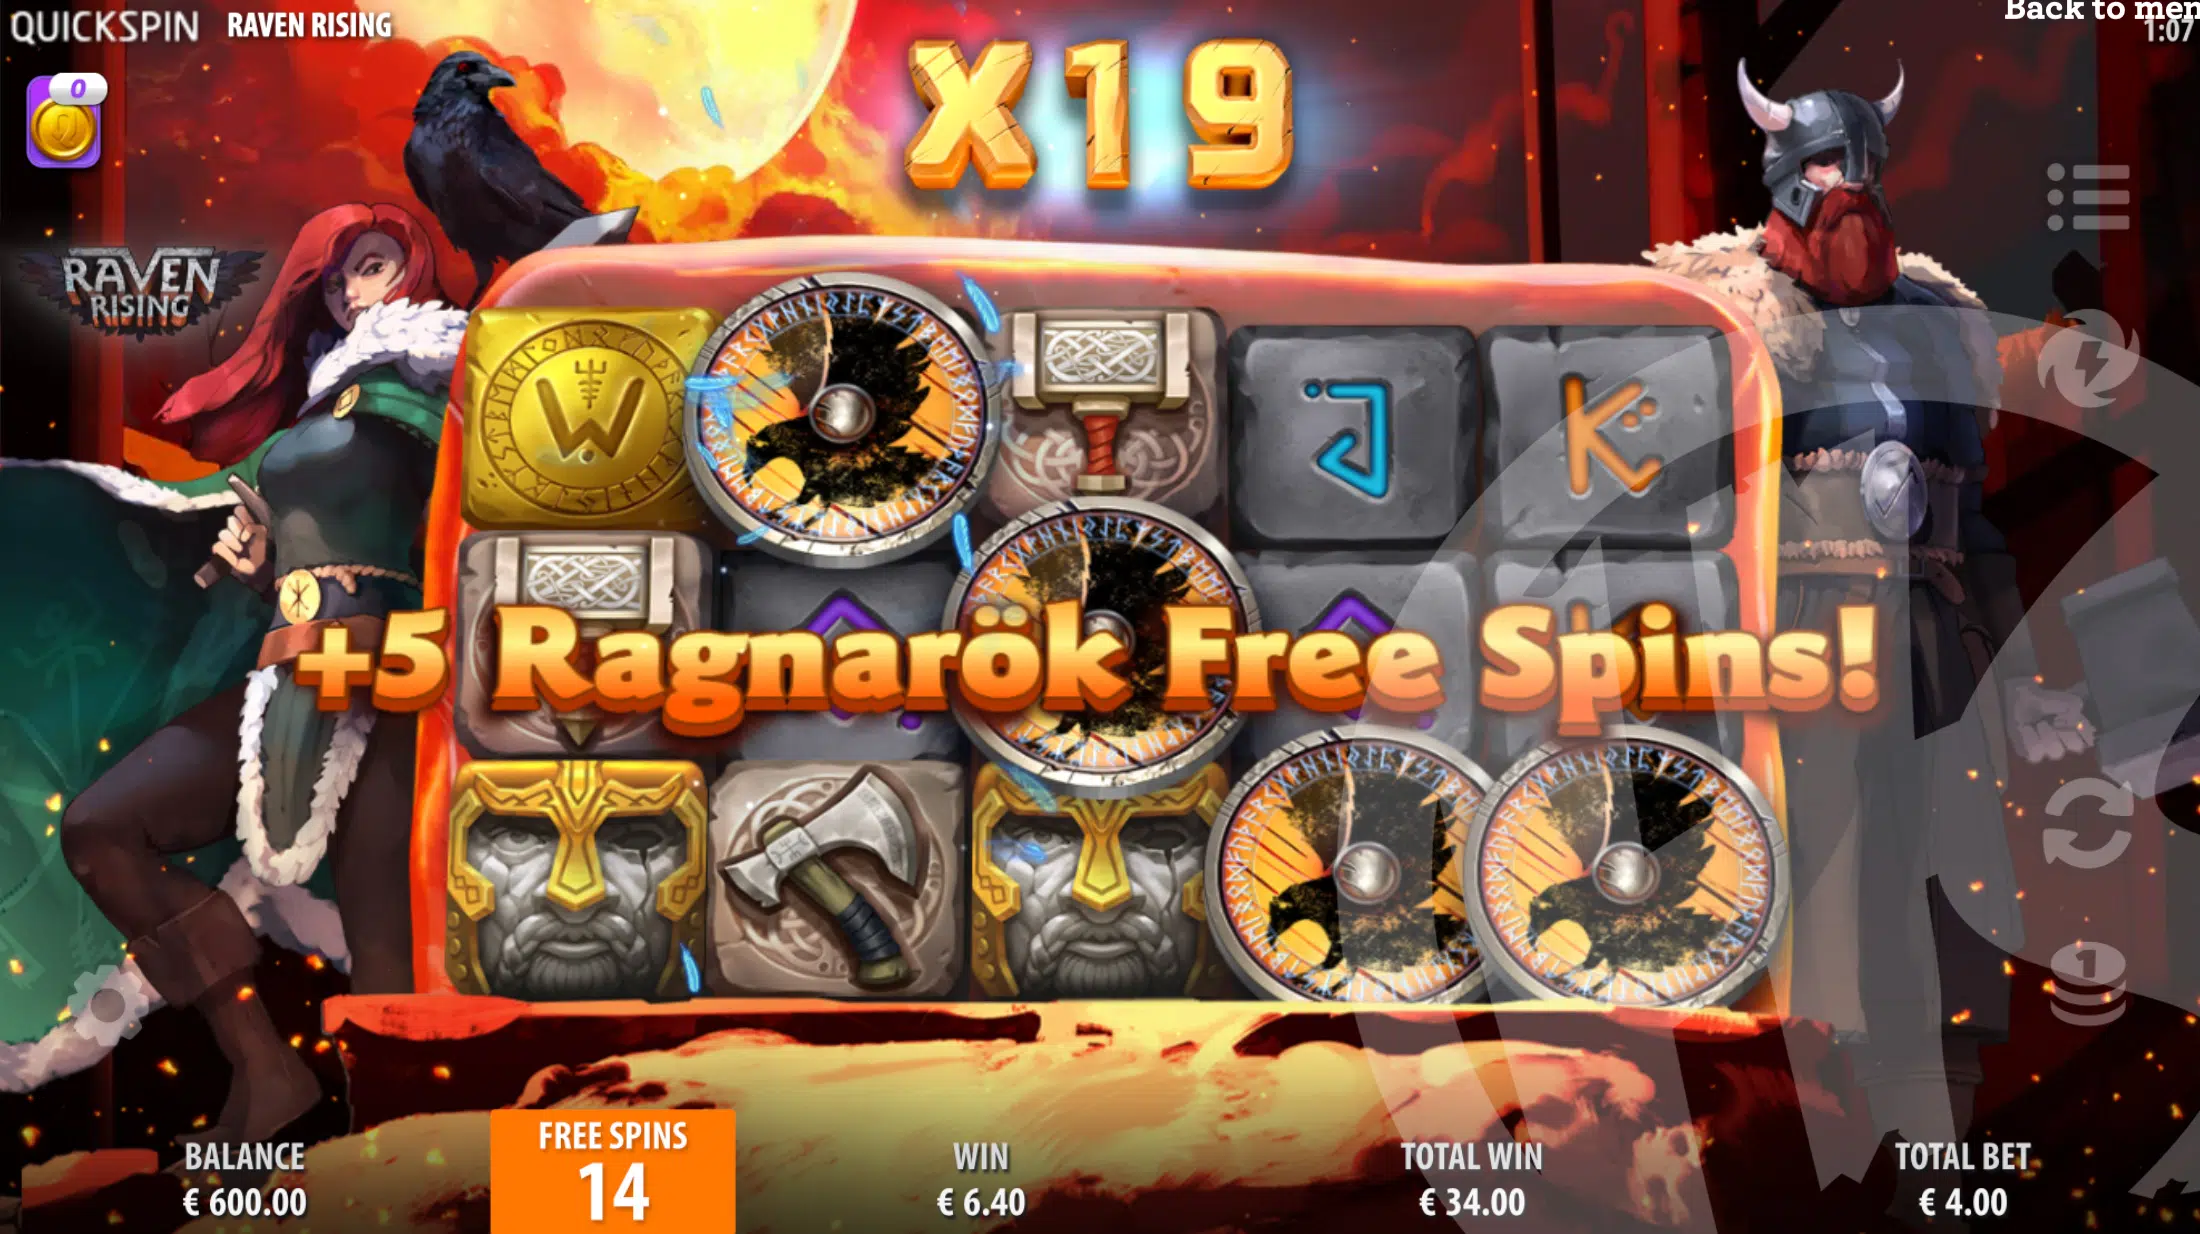 Land 3 or More Scatters to Re-trigger Free Spins